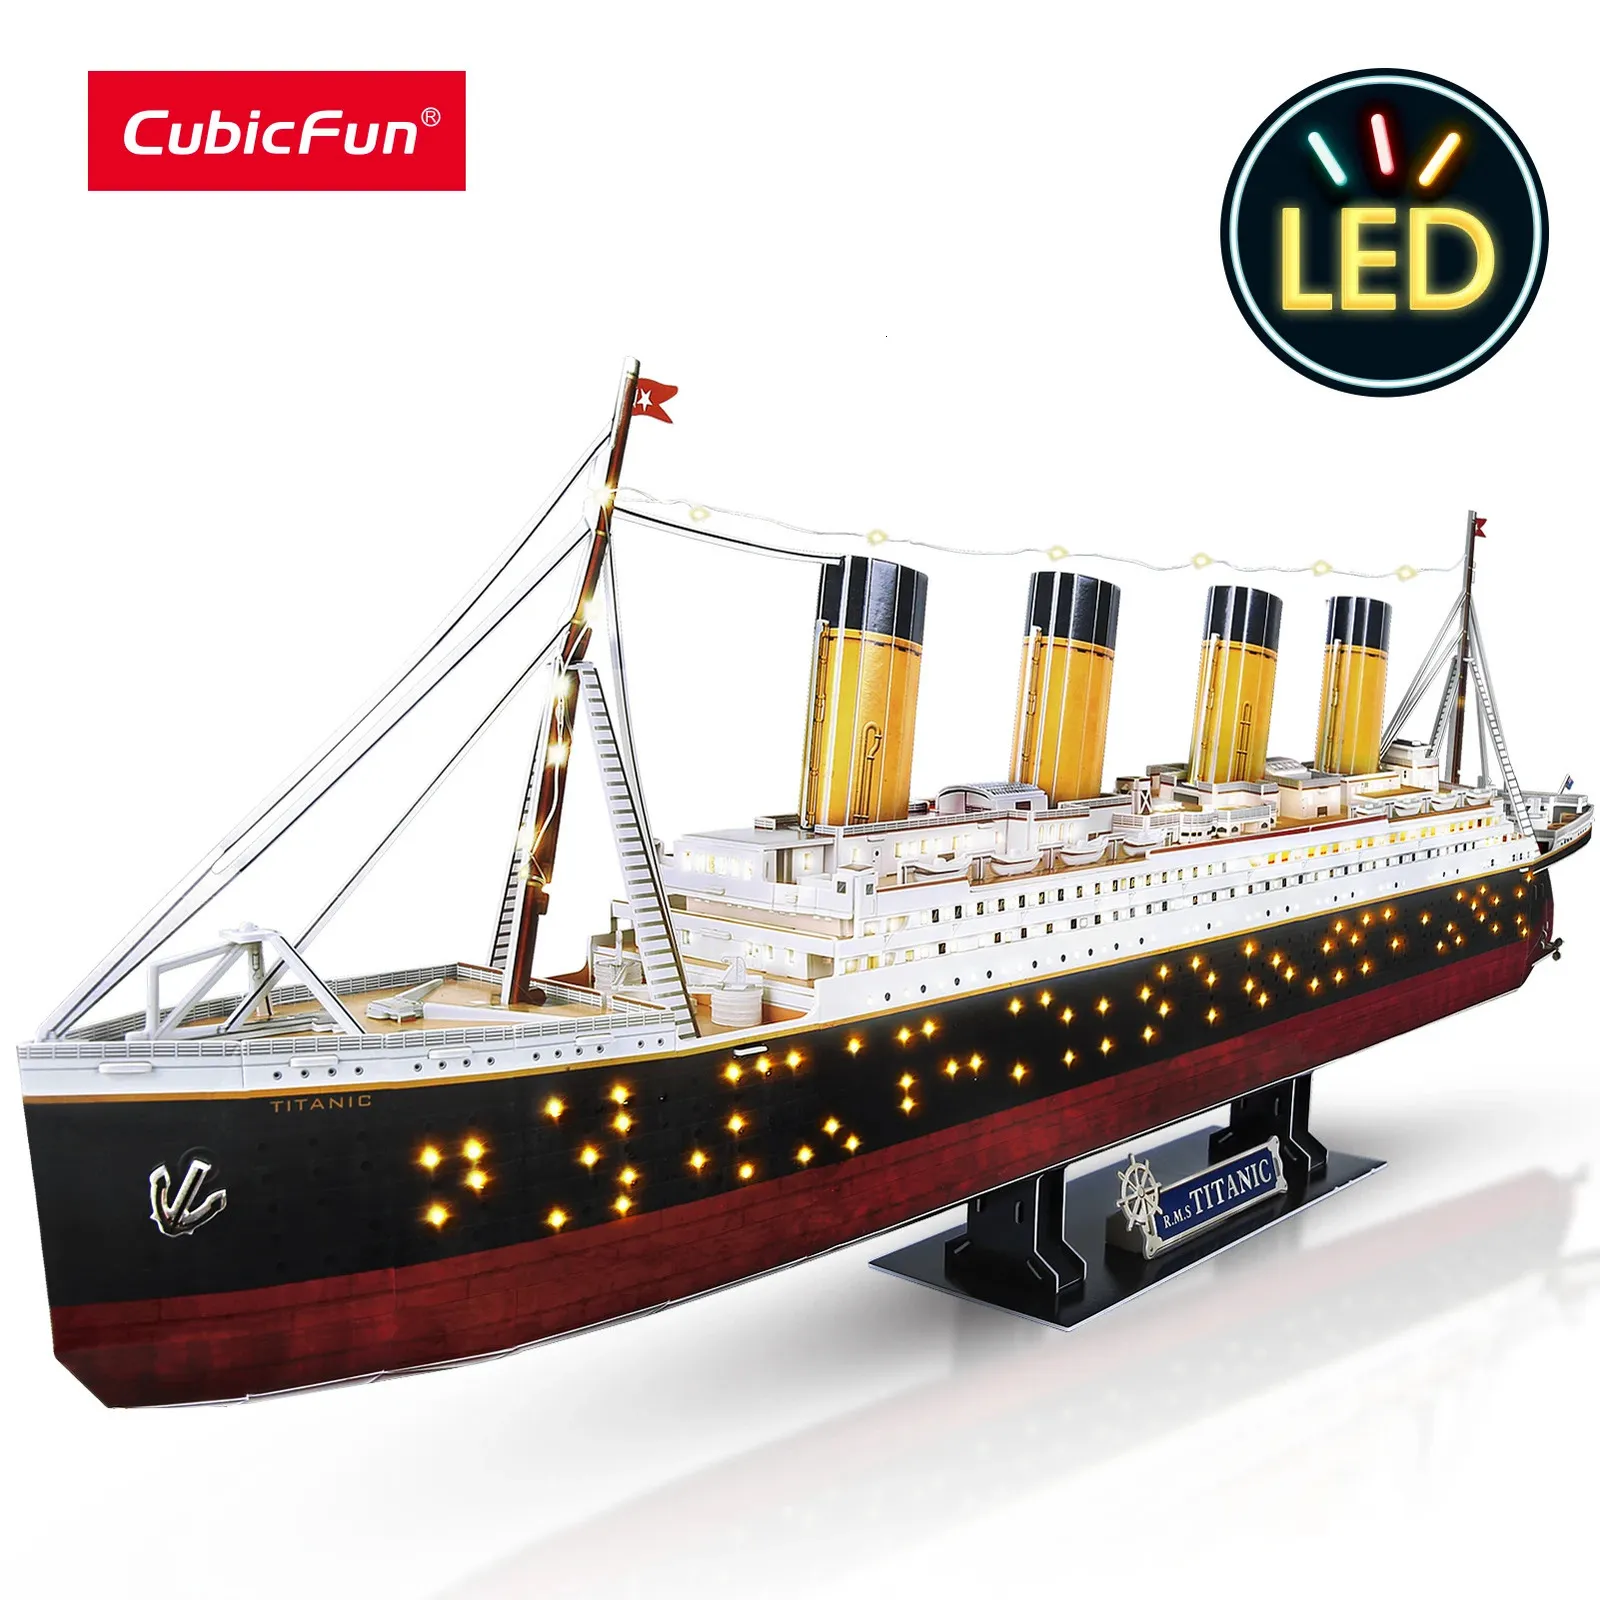 3D Puzzles CubicFun for Adults LED Titanic Ship Model 266pcs Cruise Jigsaw Toys Lighting Building Kits Home Decoration Gifts 231219